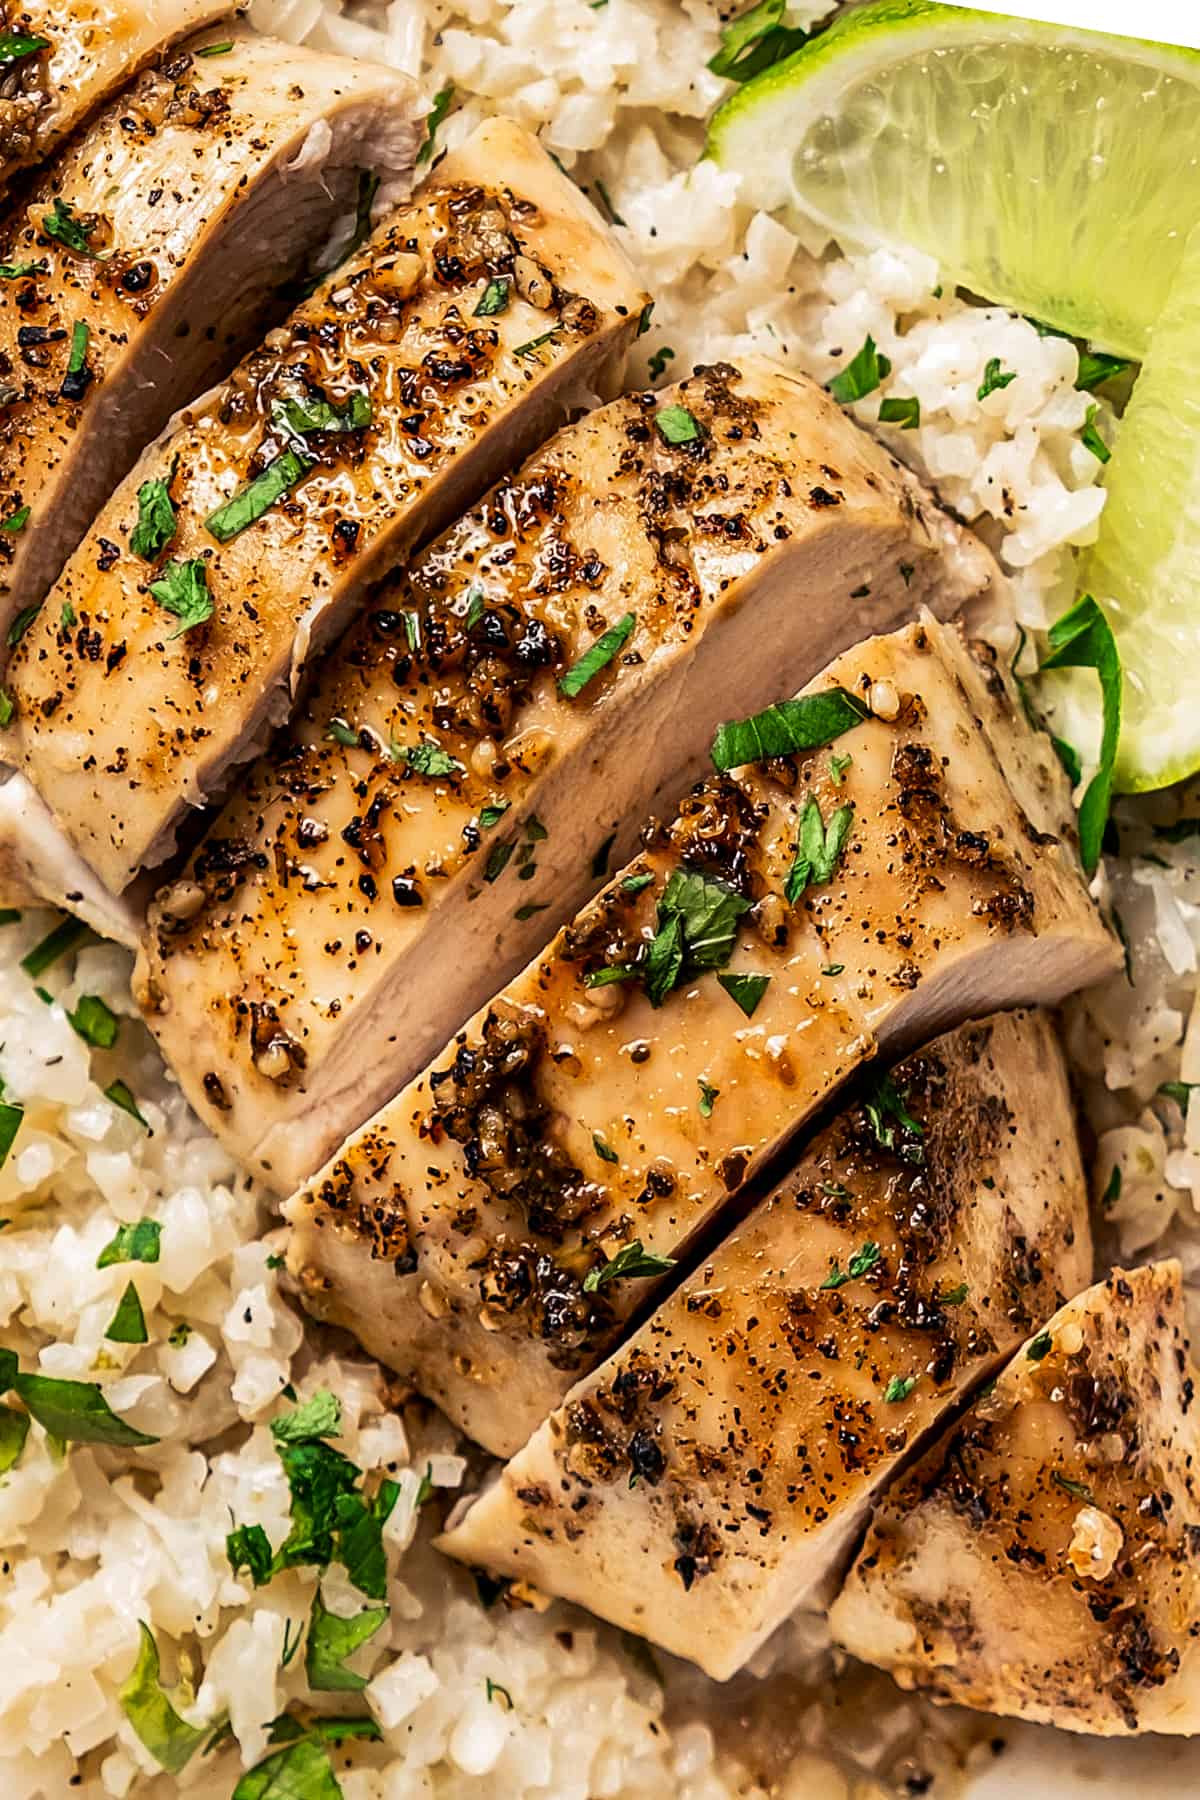 Closeup of sliced baked chicken breast over rice.